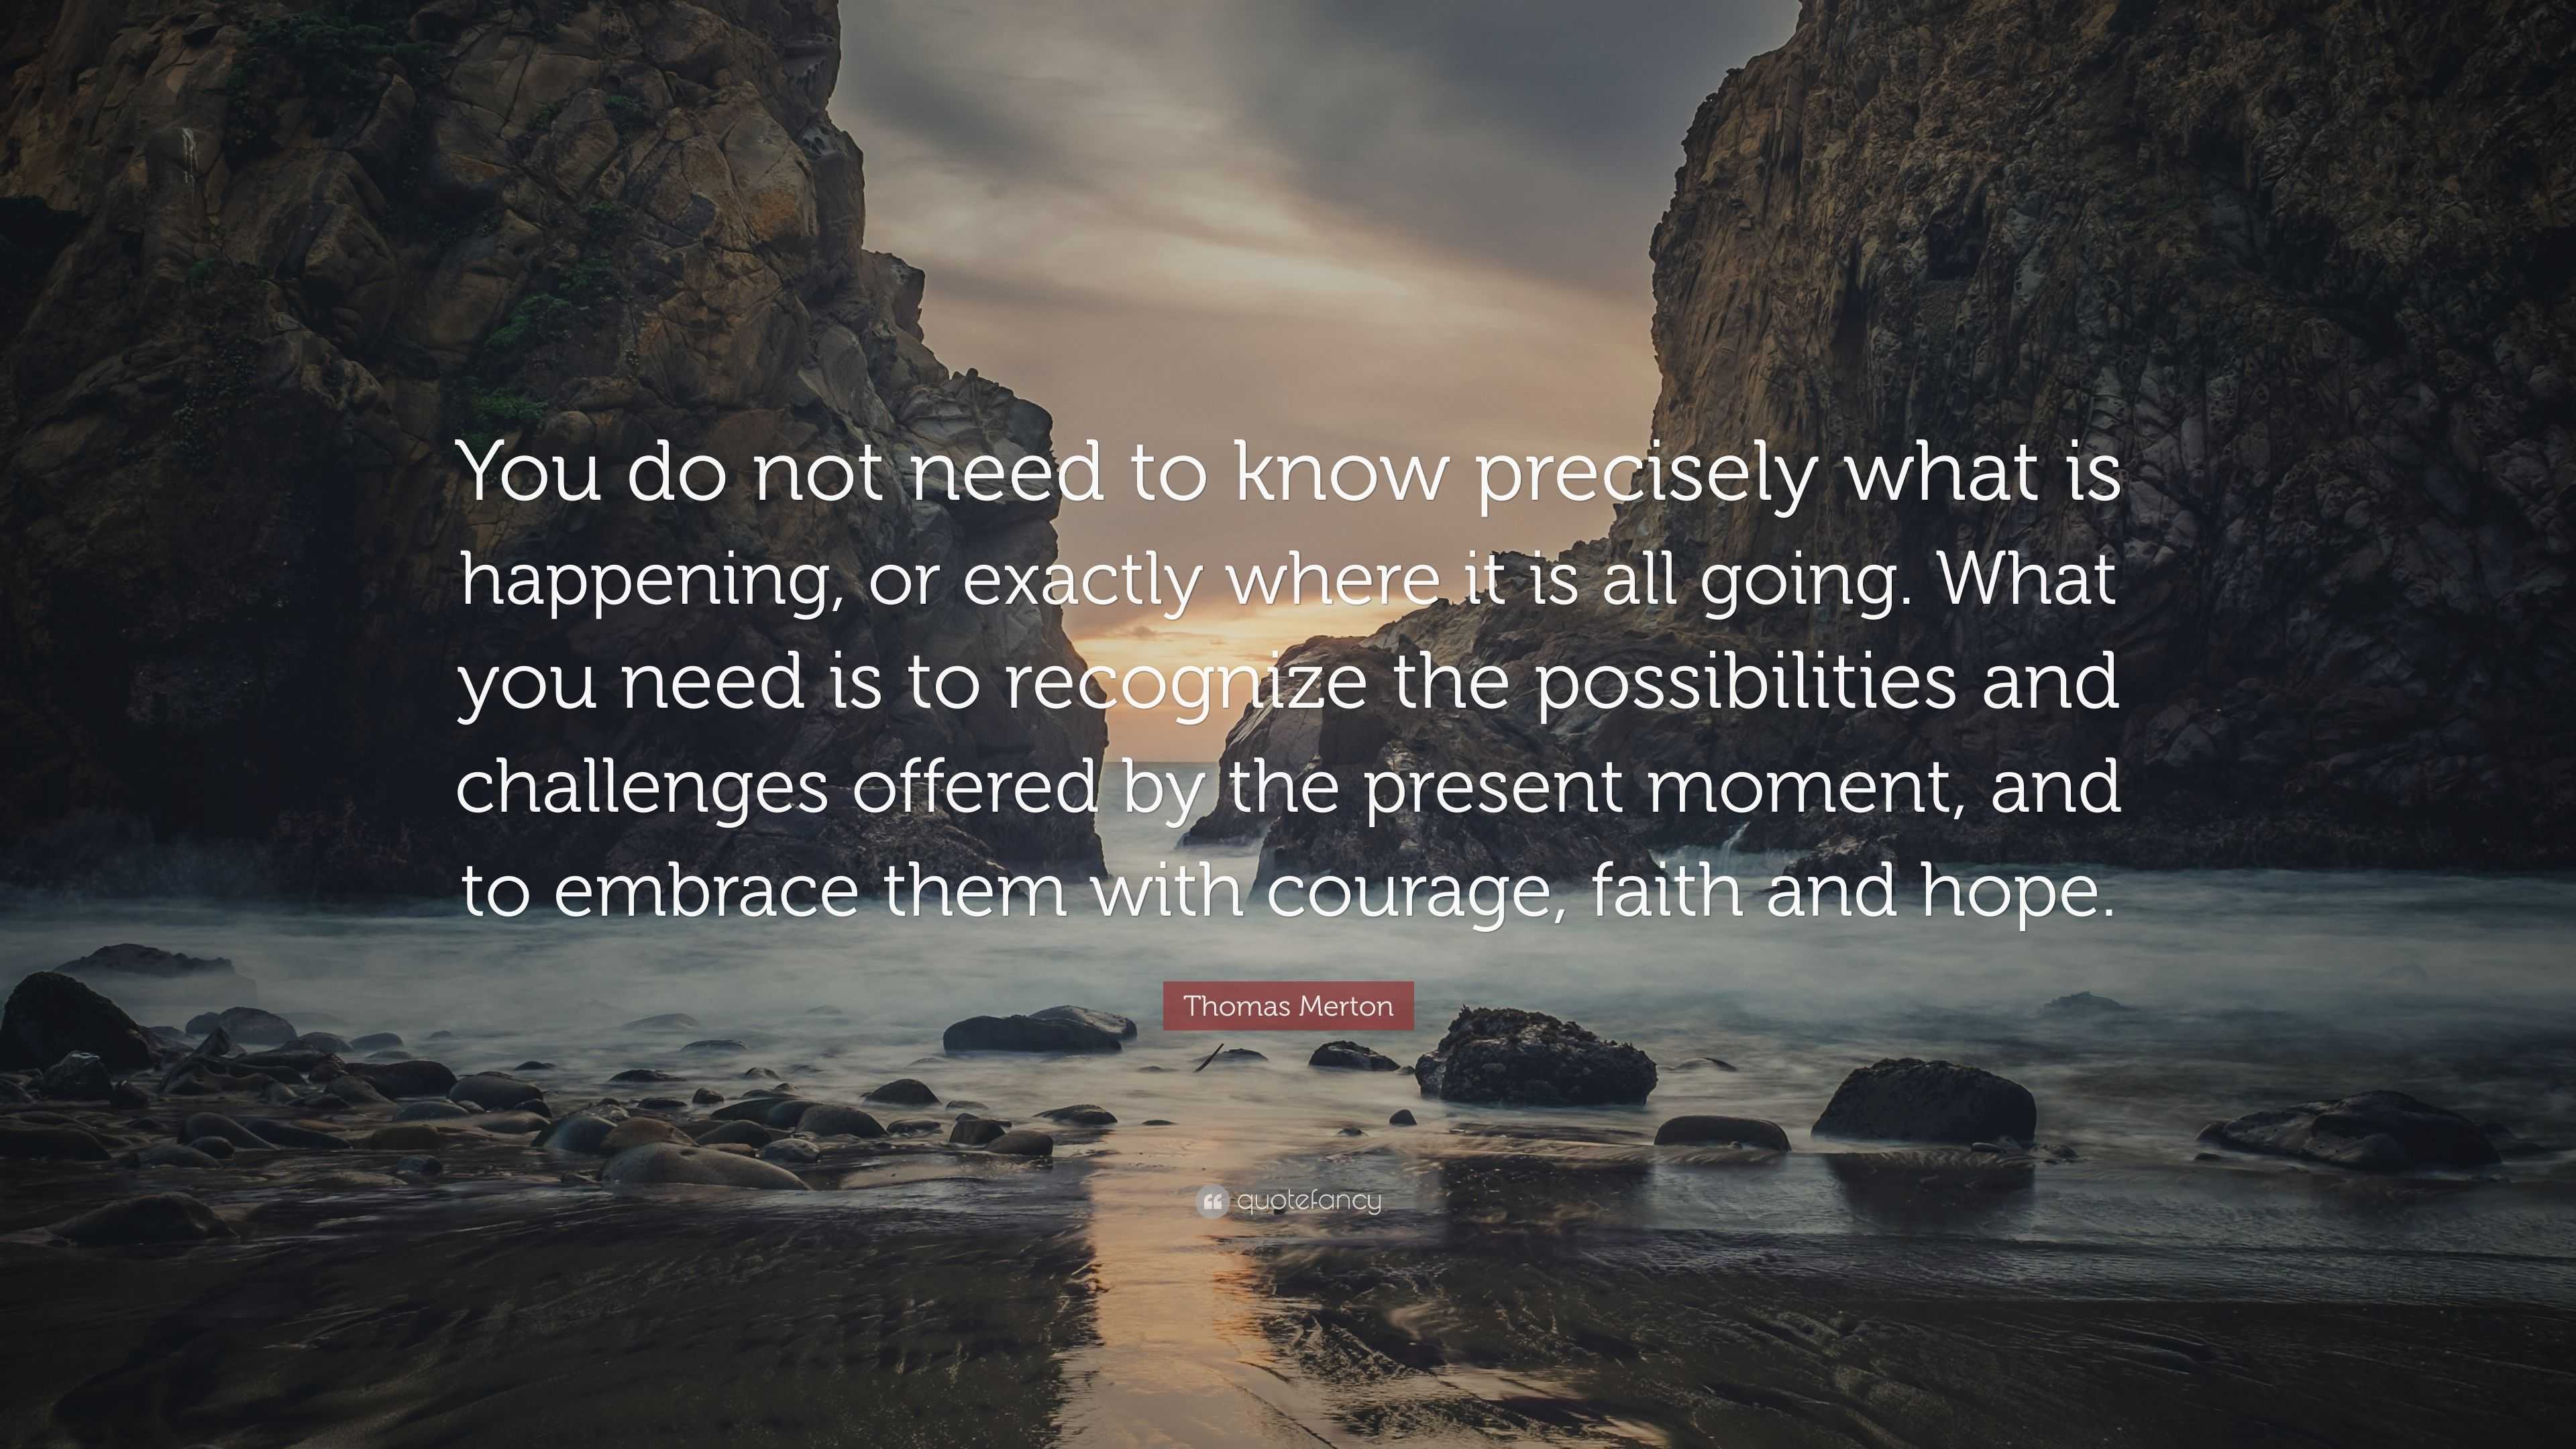 4685787 Thomas Merton Quote You do not need to know precisely what is